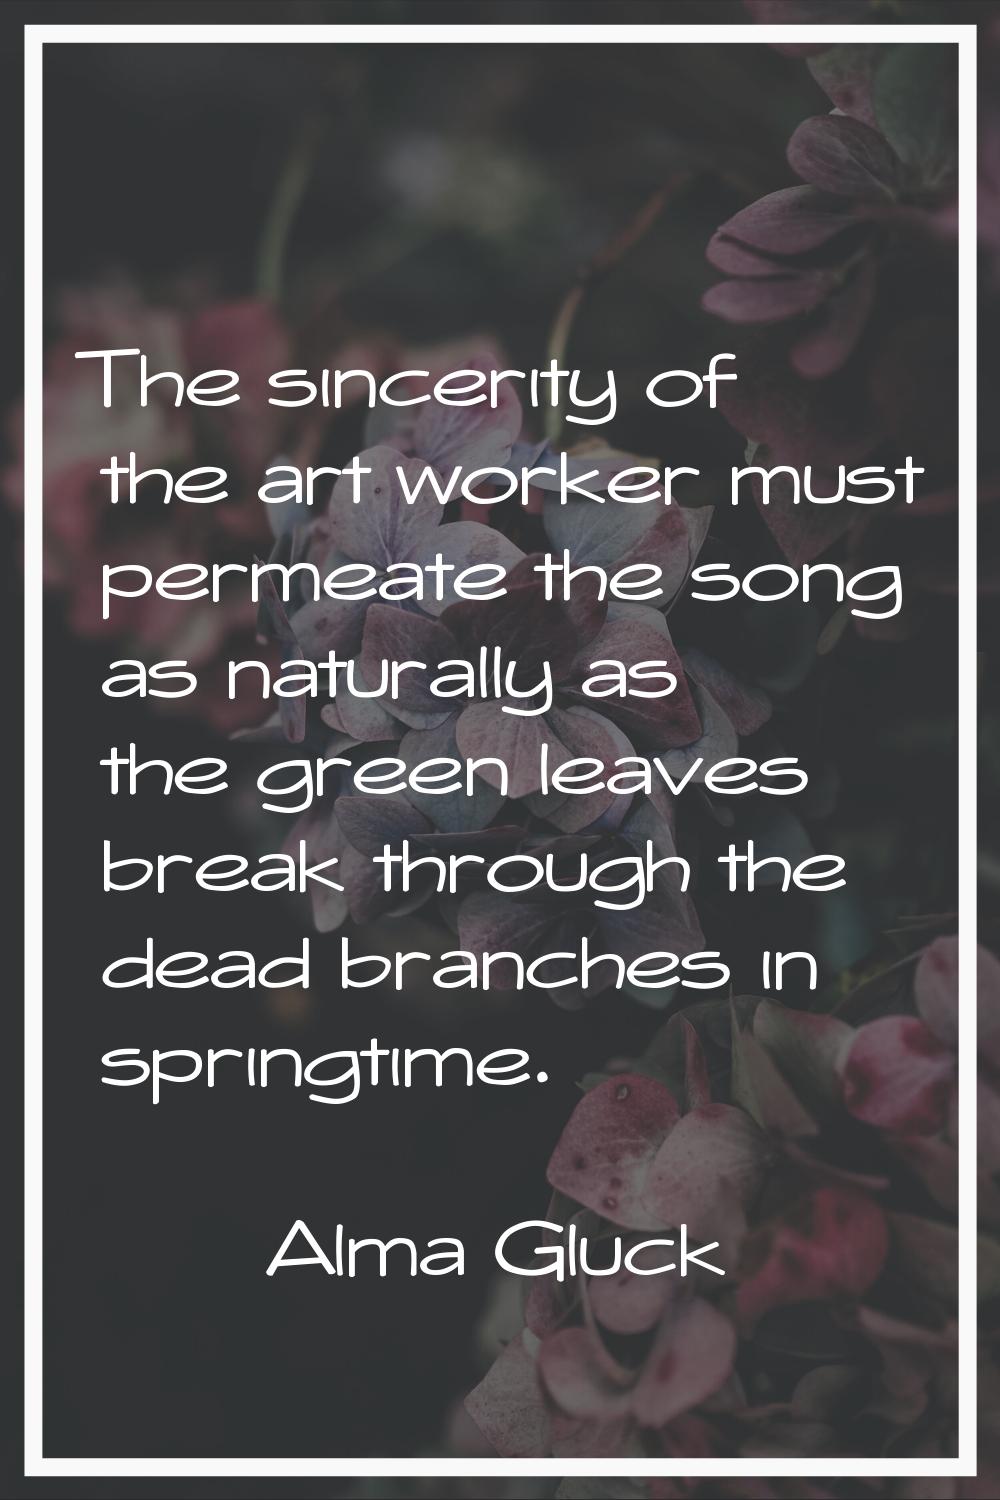 The sincerity of the art worker must permeate the song as naturally as the green leaves break throu